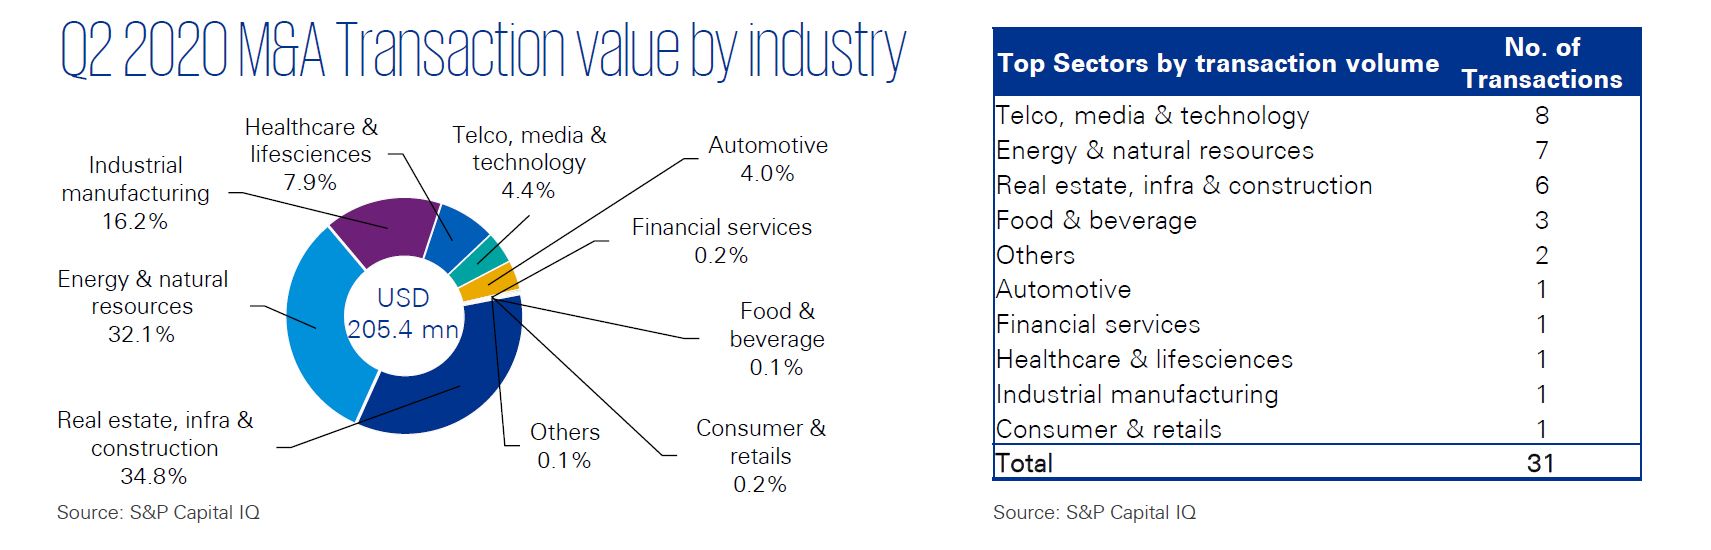 Q2 2020 M&A Transaction value by industry